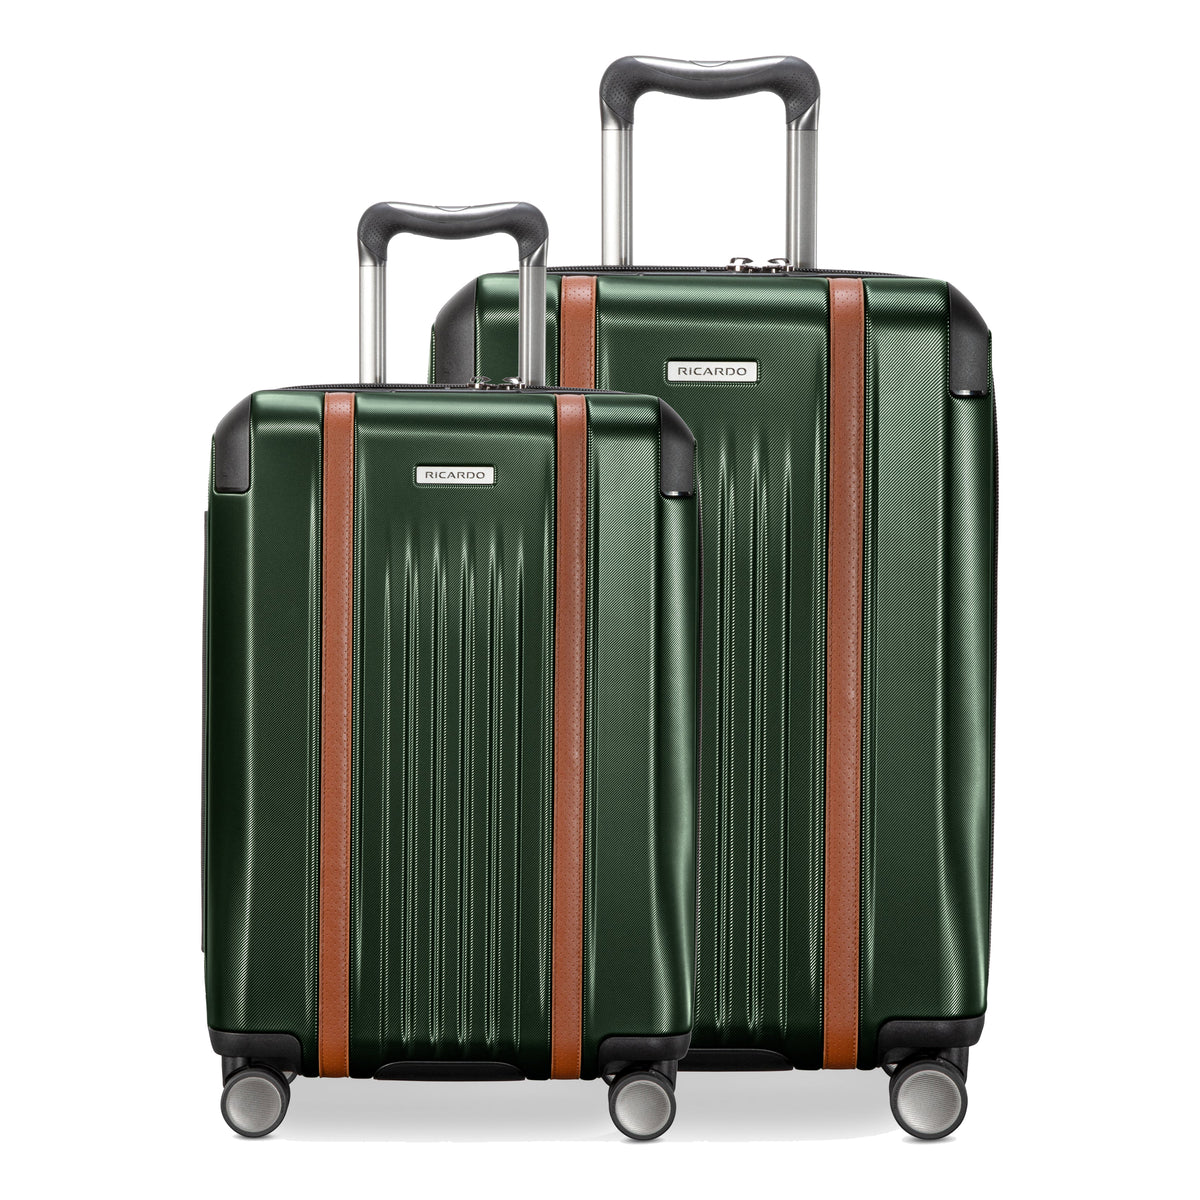 Ricardo Beverly Hills Montecito 2.0 Montecito 2.0 Hardside 2-Piece Set (21" Carry-On, 29" Large Checked) Hunter Green